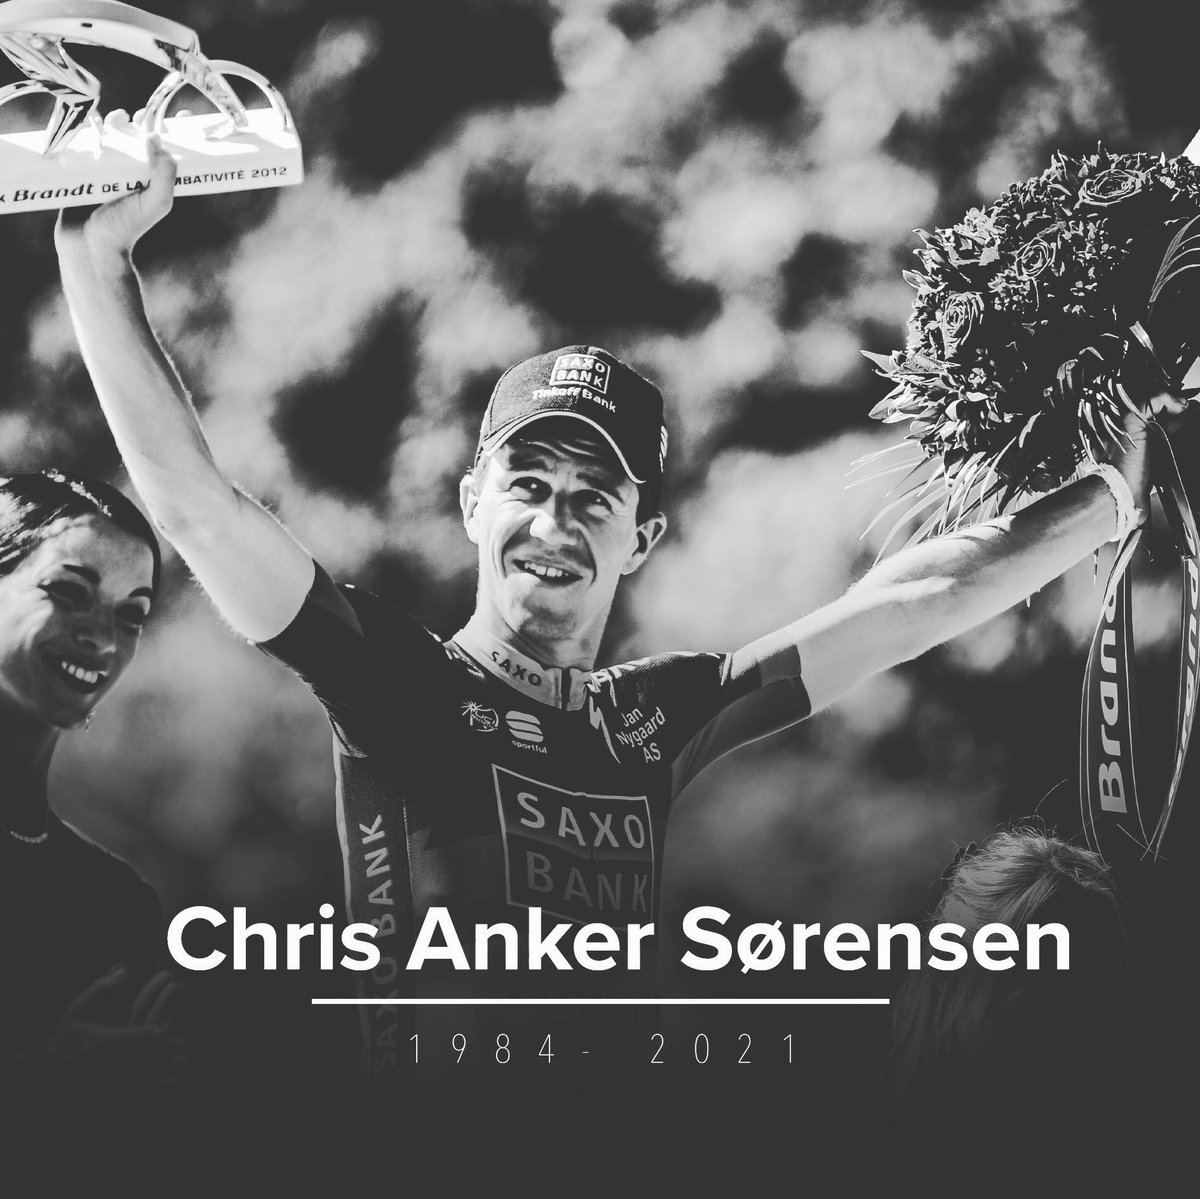 RIP Chris You will be missed by many. I will remember our last chat in the tour. What a good man. Thoughts are with his family and friends